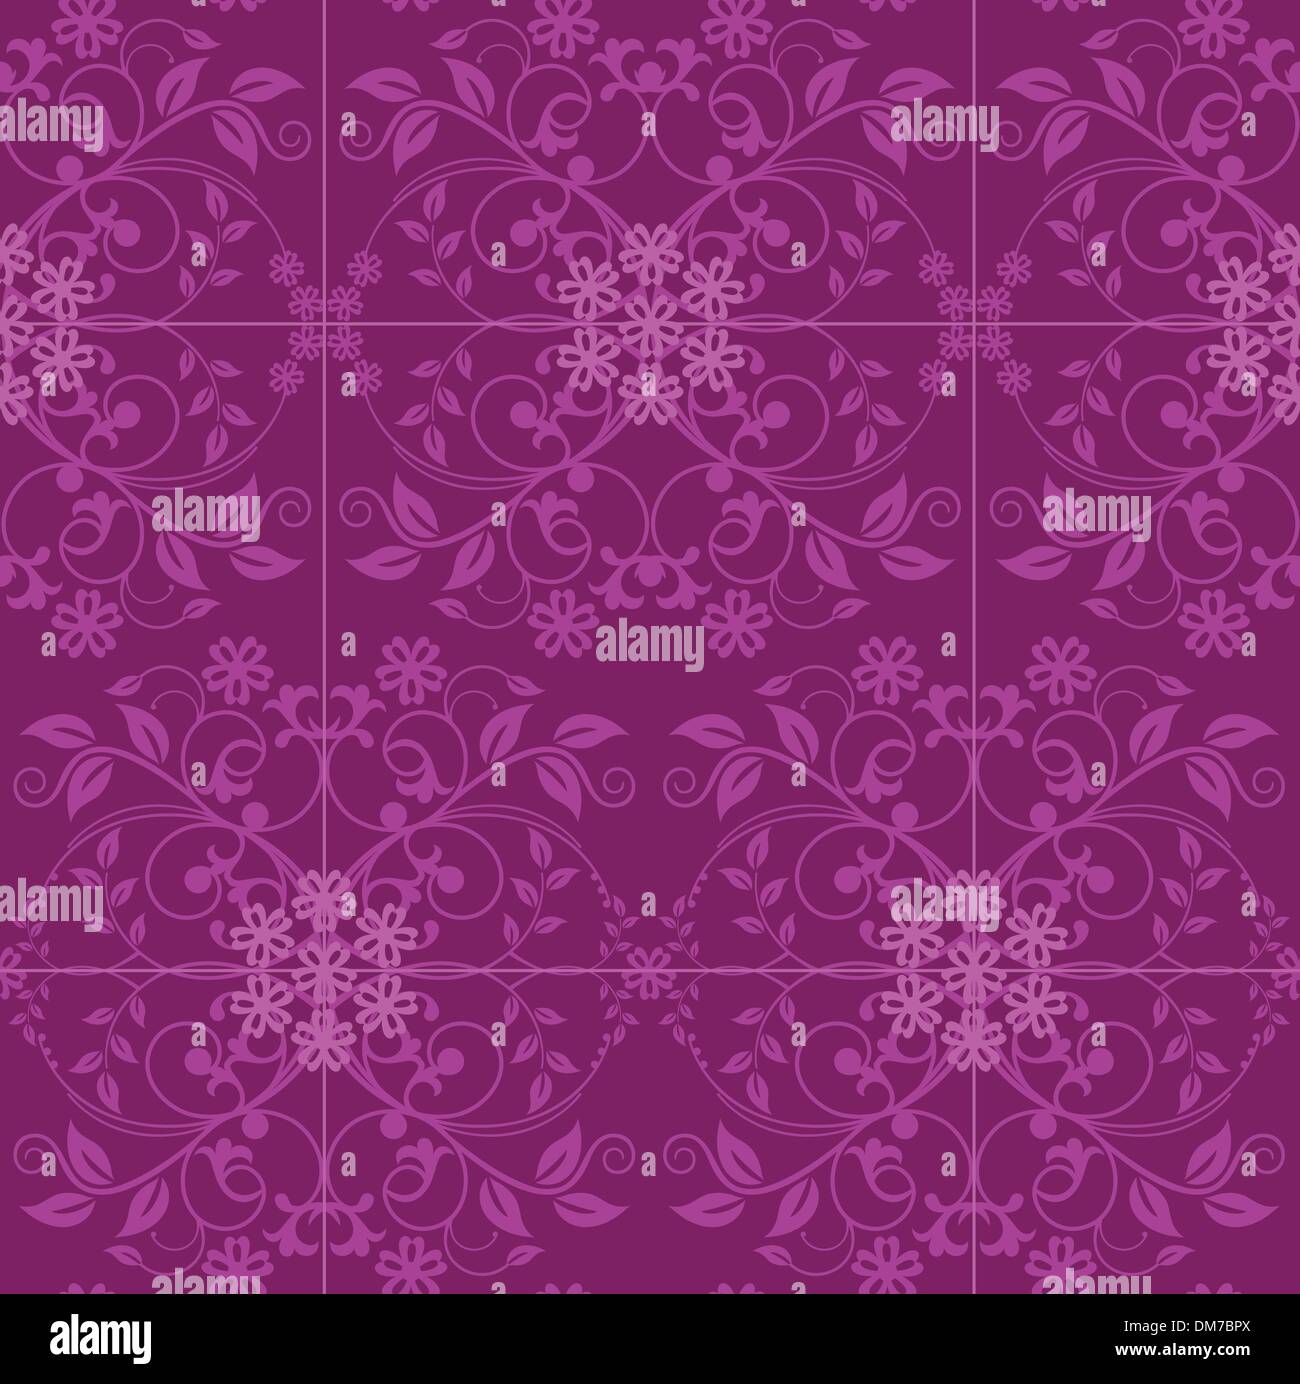 Fuchsia and pink floral wallpaper Stock Vector